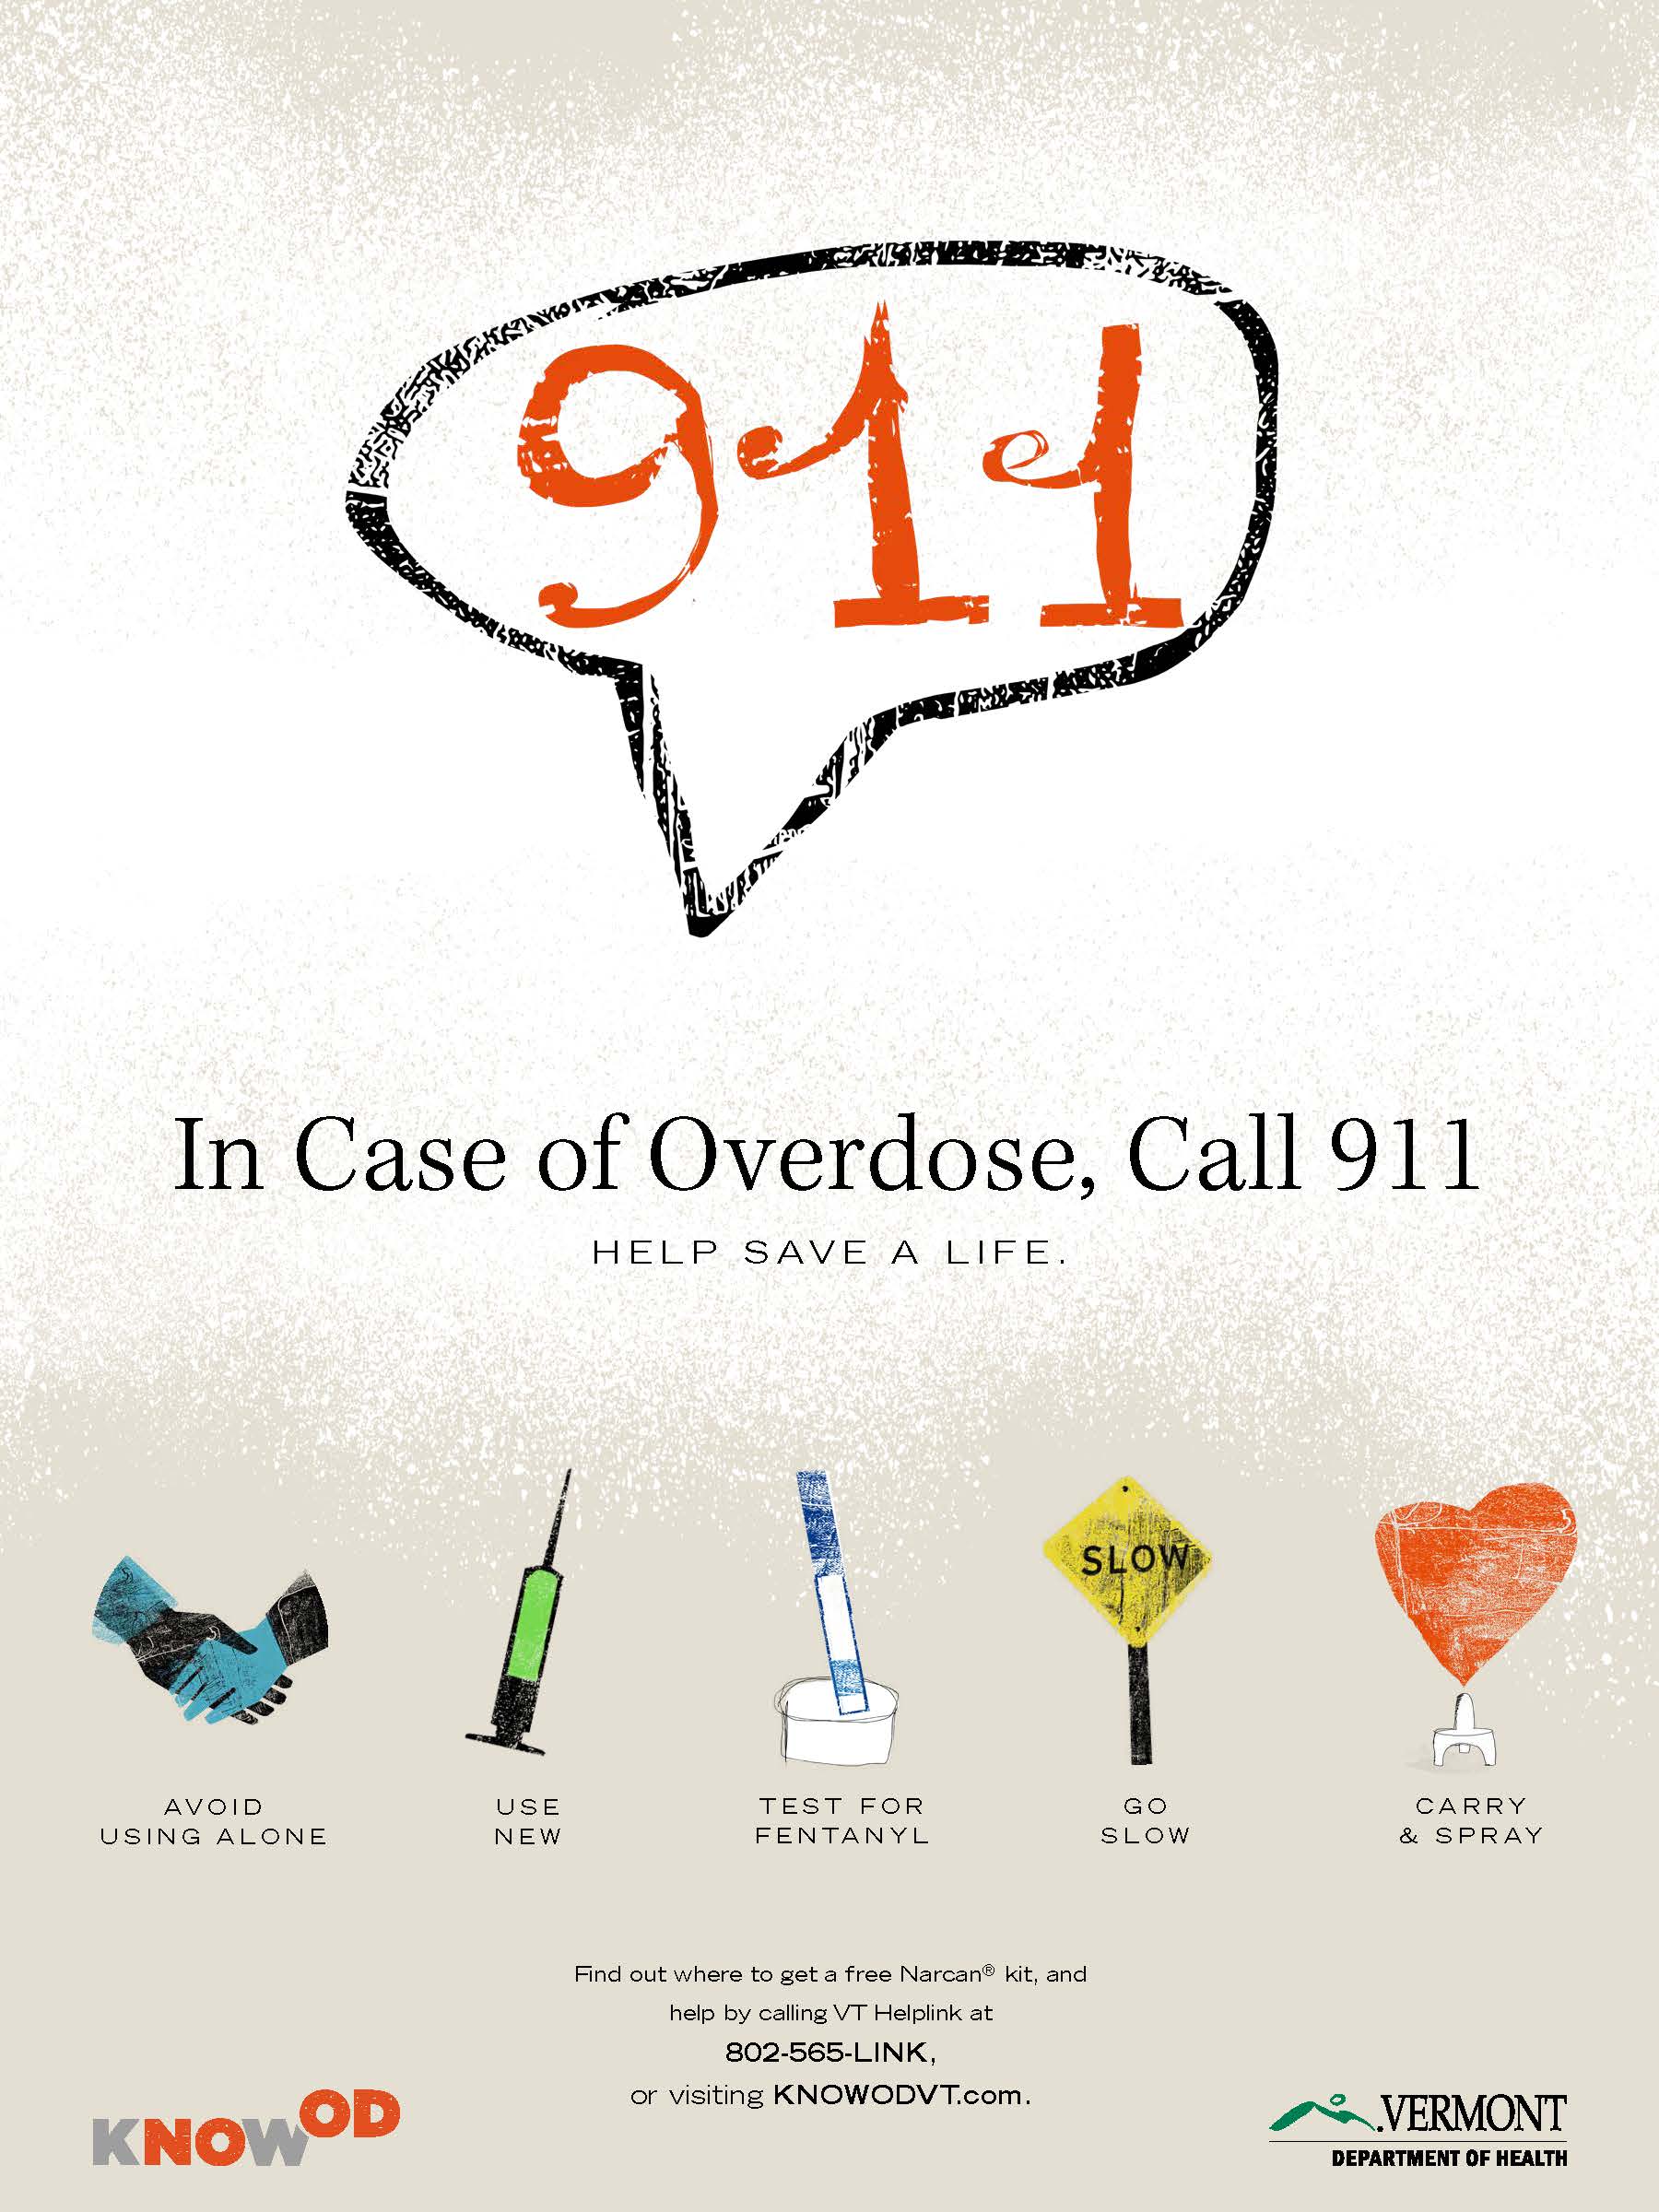 Know OD in case of overdose, call 911 poster